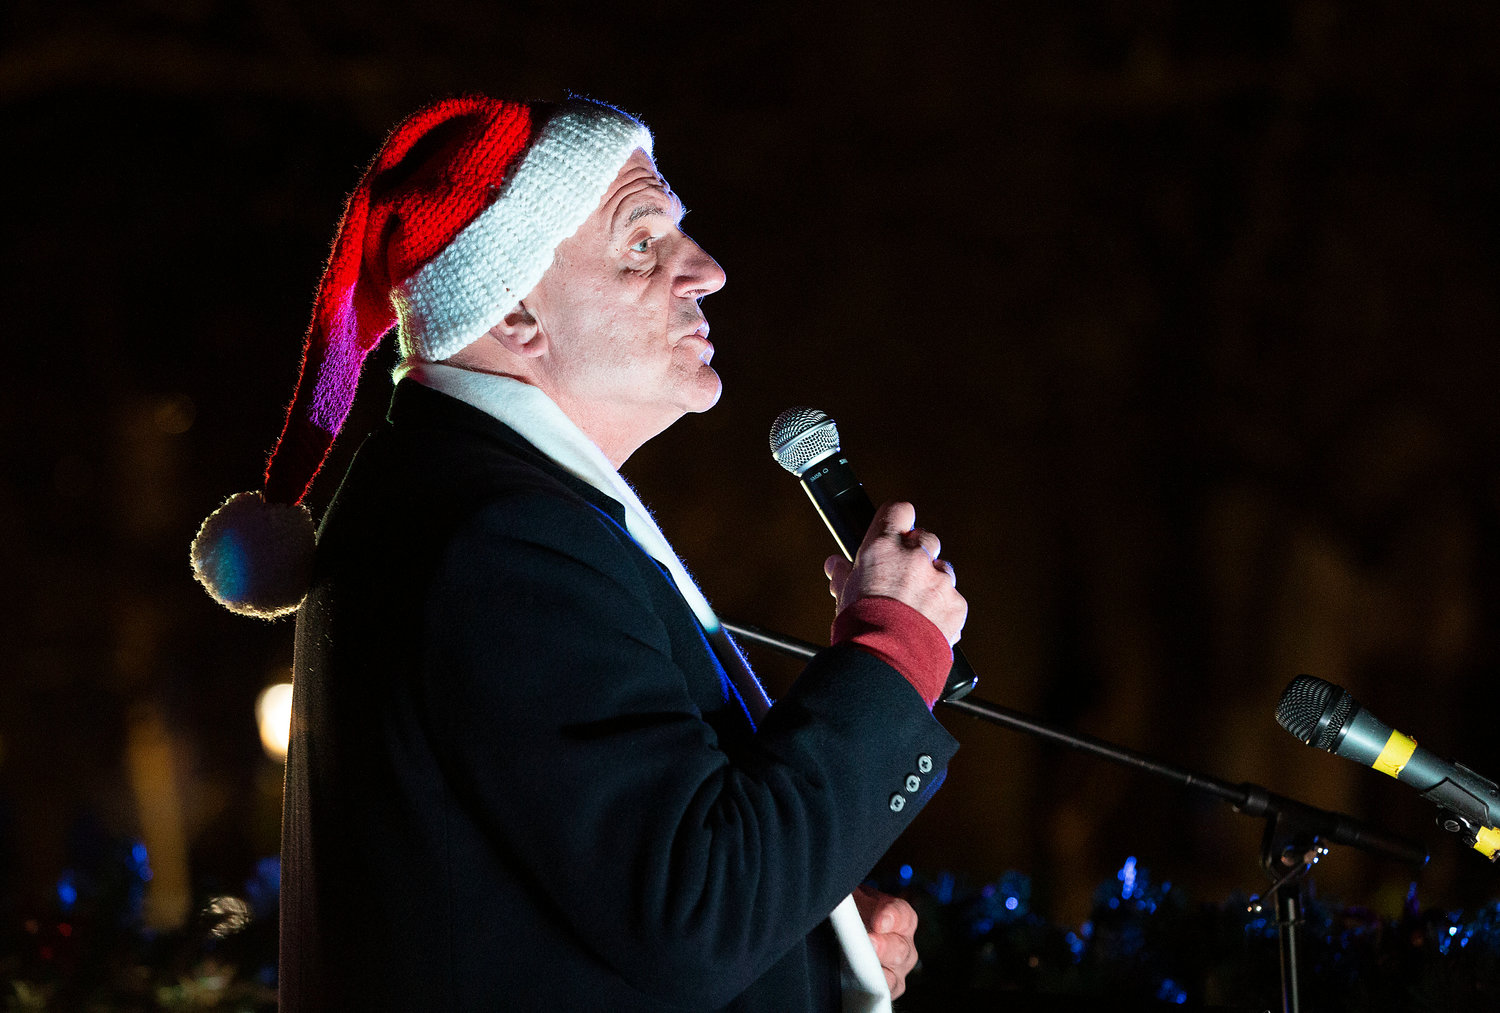 Dave Scarpino, of the Bristol Christmas Festival Committee, speaks to attendees of the illumination.